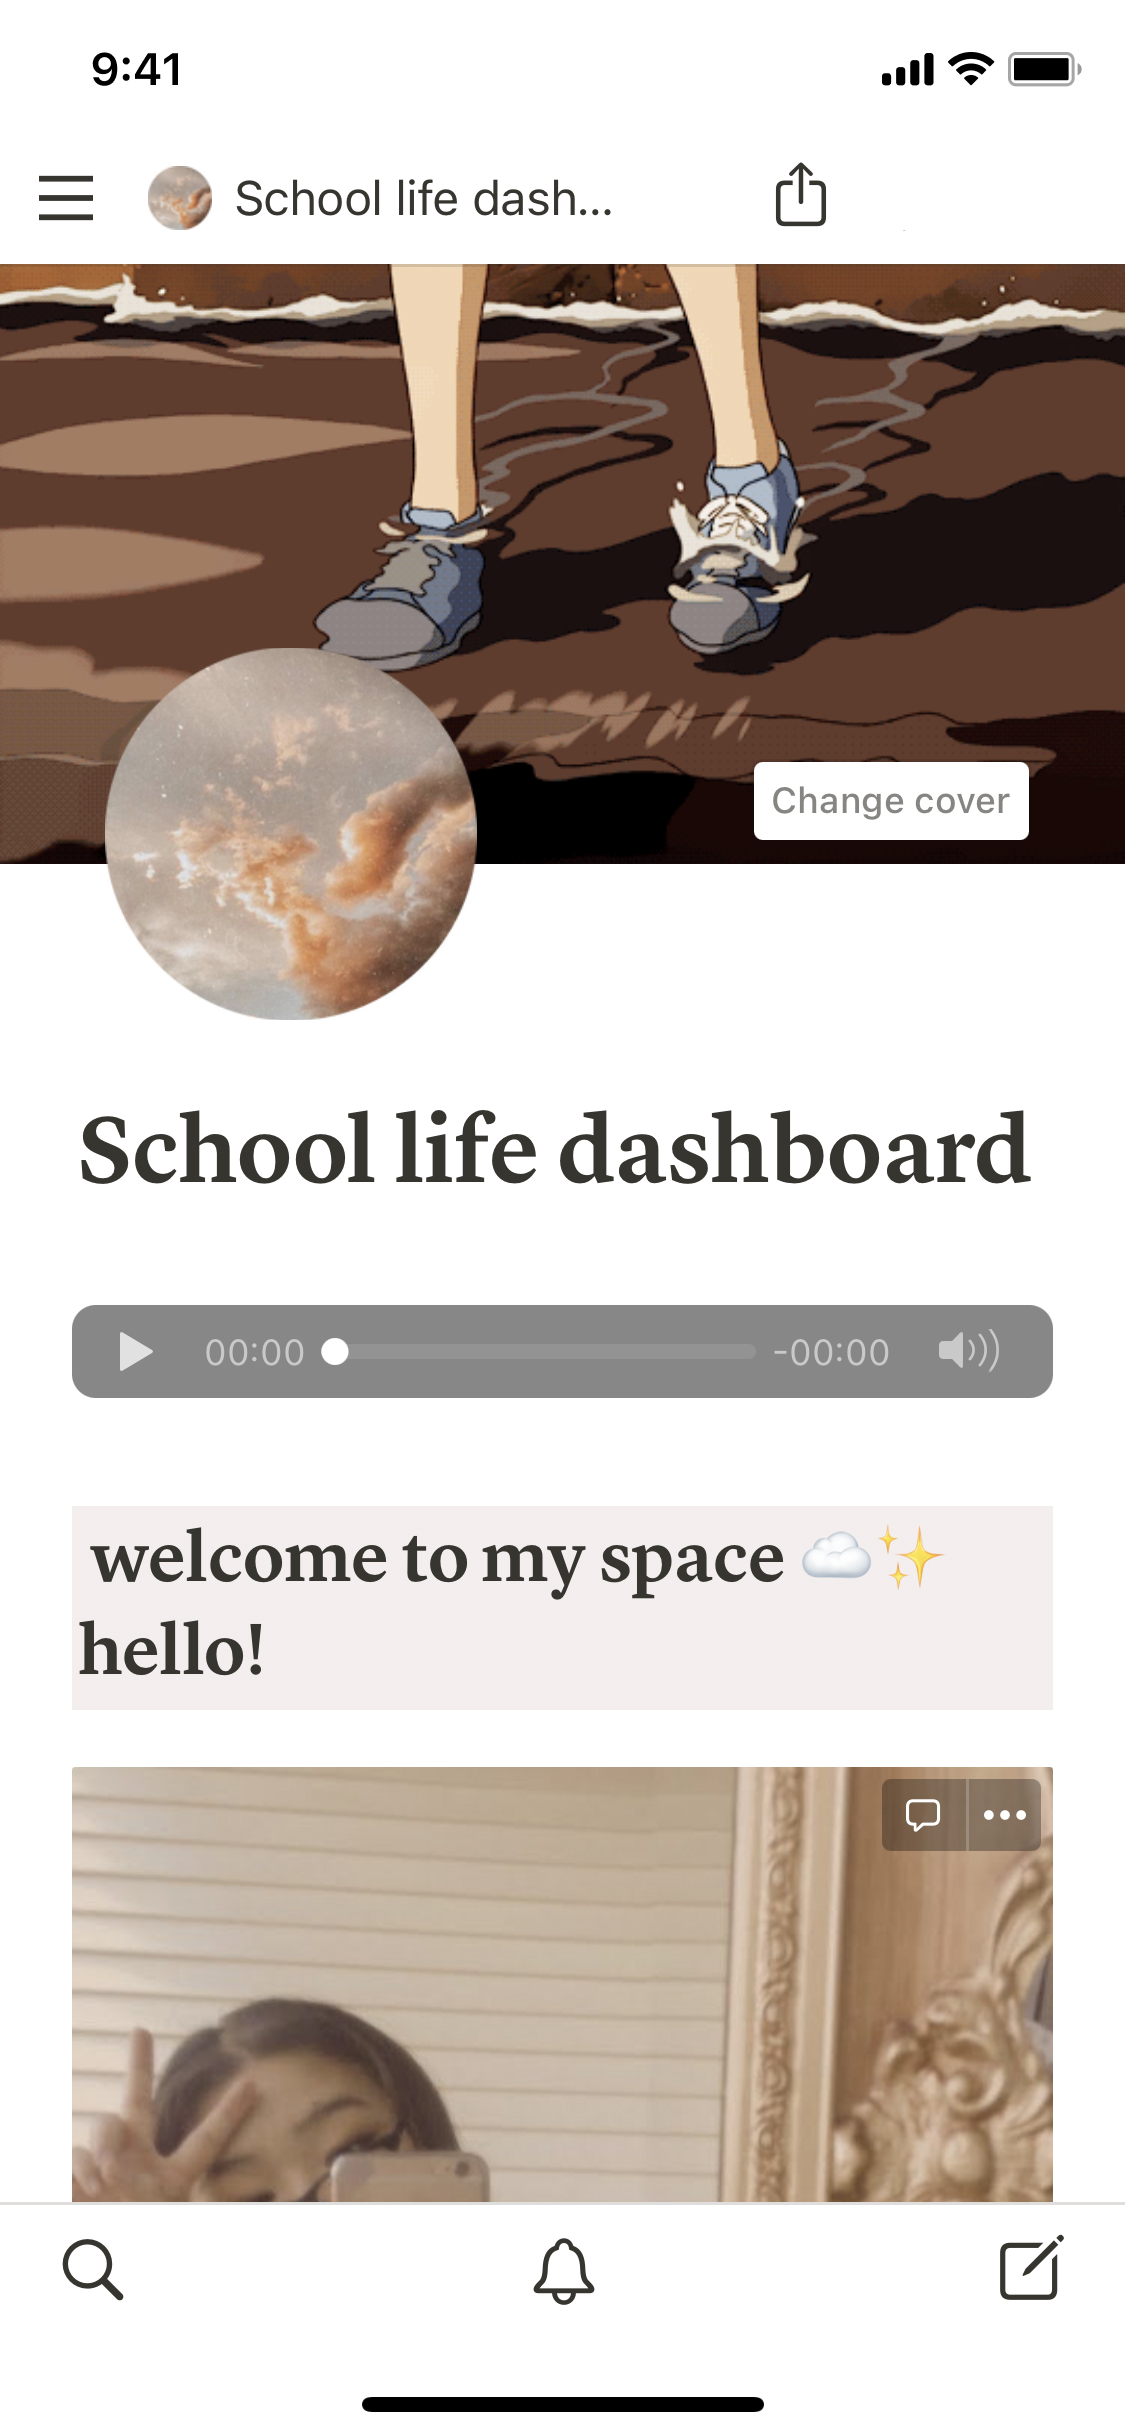 The mobile image for the School life dashboard template